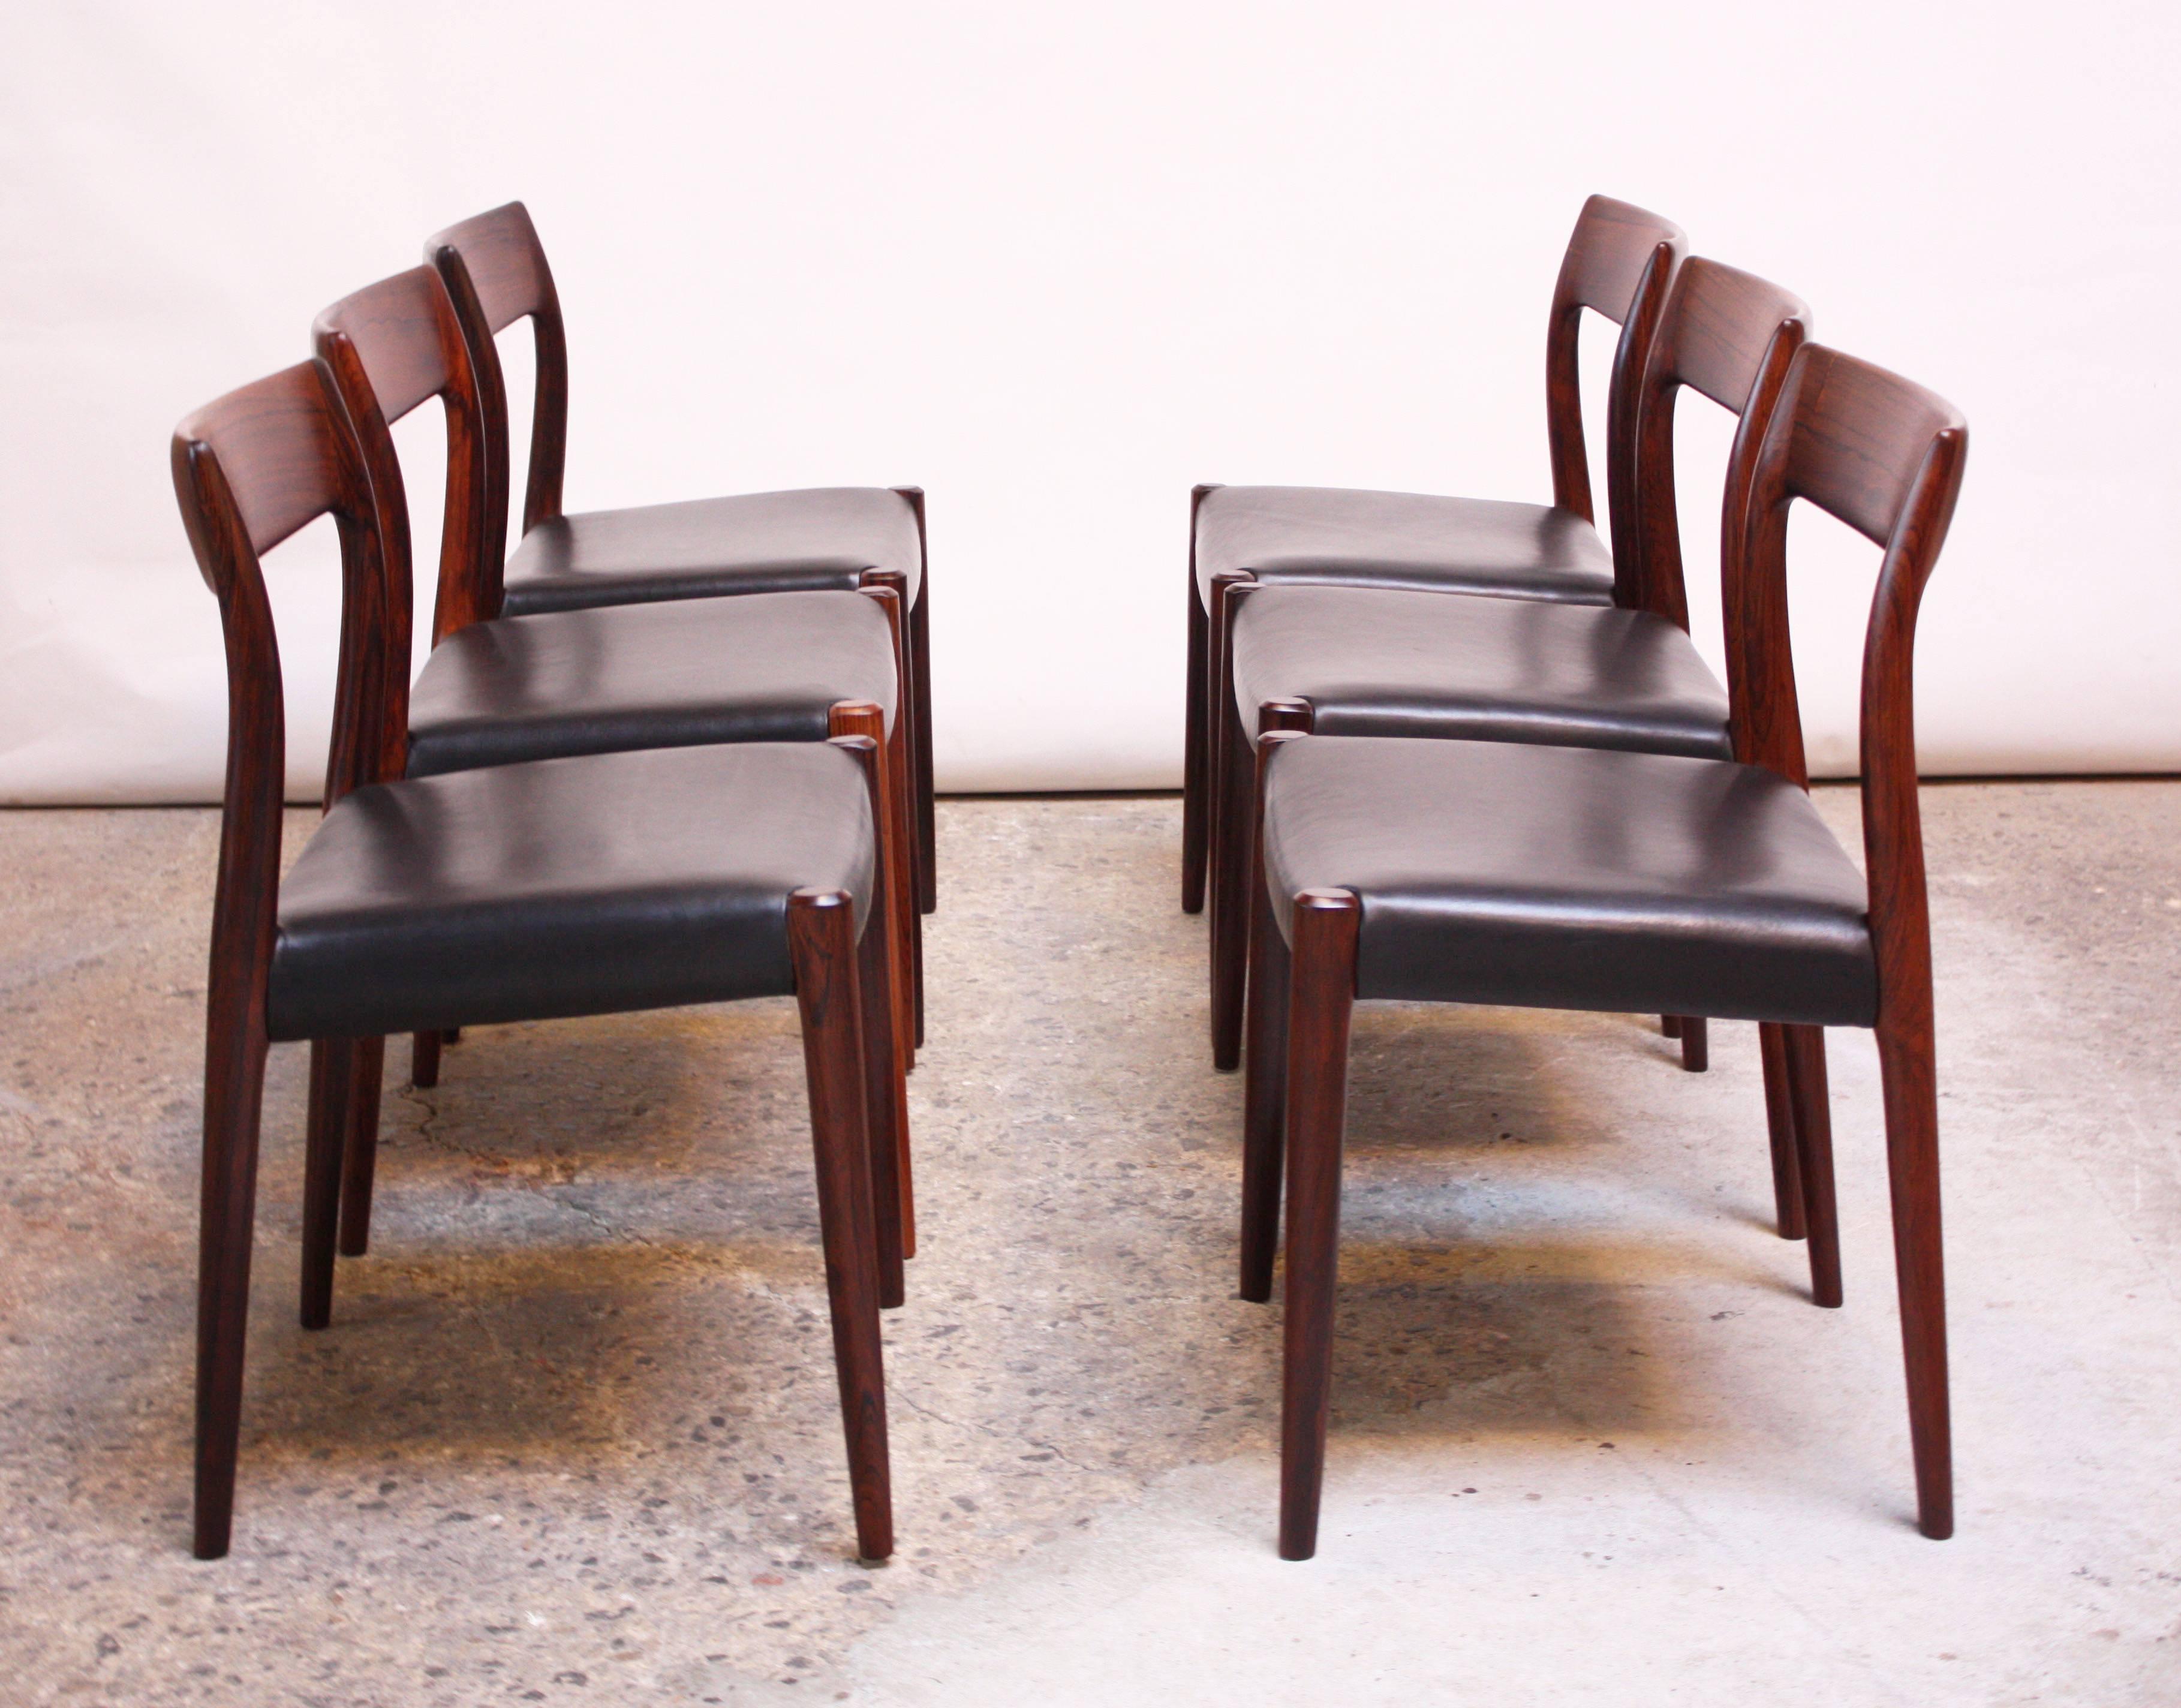 Set of six model #77 chairs in rosewood designed in 1959 by Niels Ole Møller for J.L.Møllers Stolefabrik of Denmark. Sculptural rosewood frame with vivid grain and rich color with newly upholstered black leather seat.